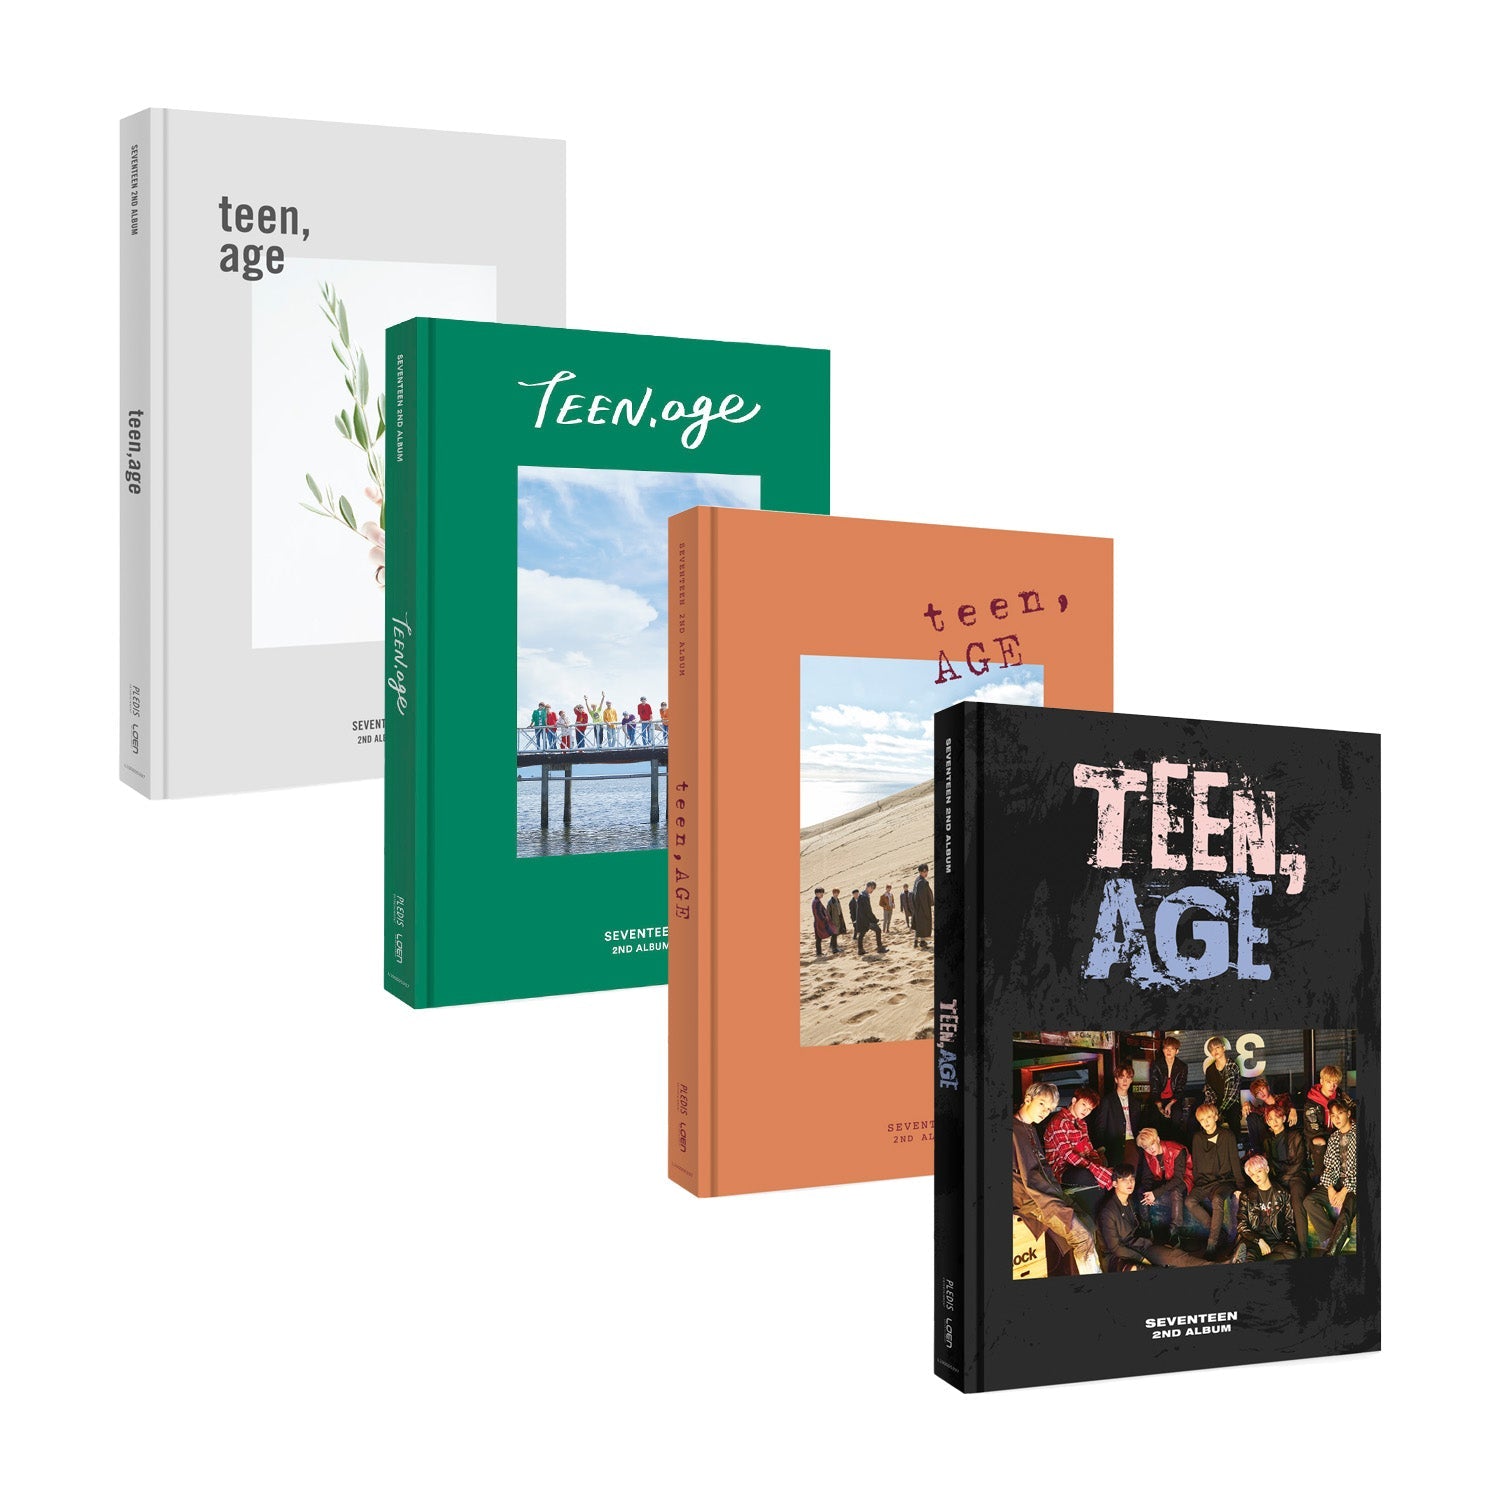 SEVENTEEN 2ND ALBUM 'TEEN, AGE' (RE-RELEASE) SET COVER